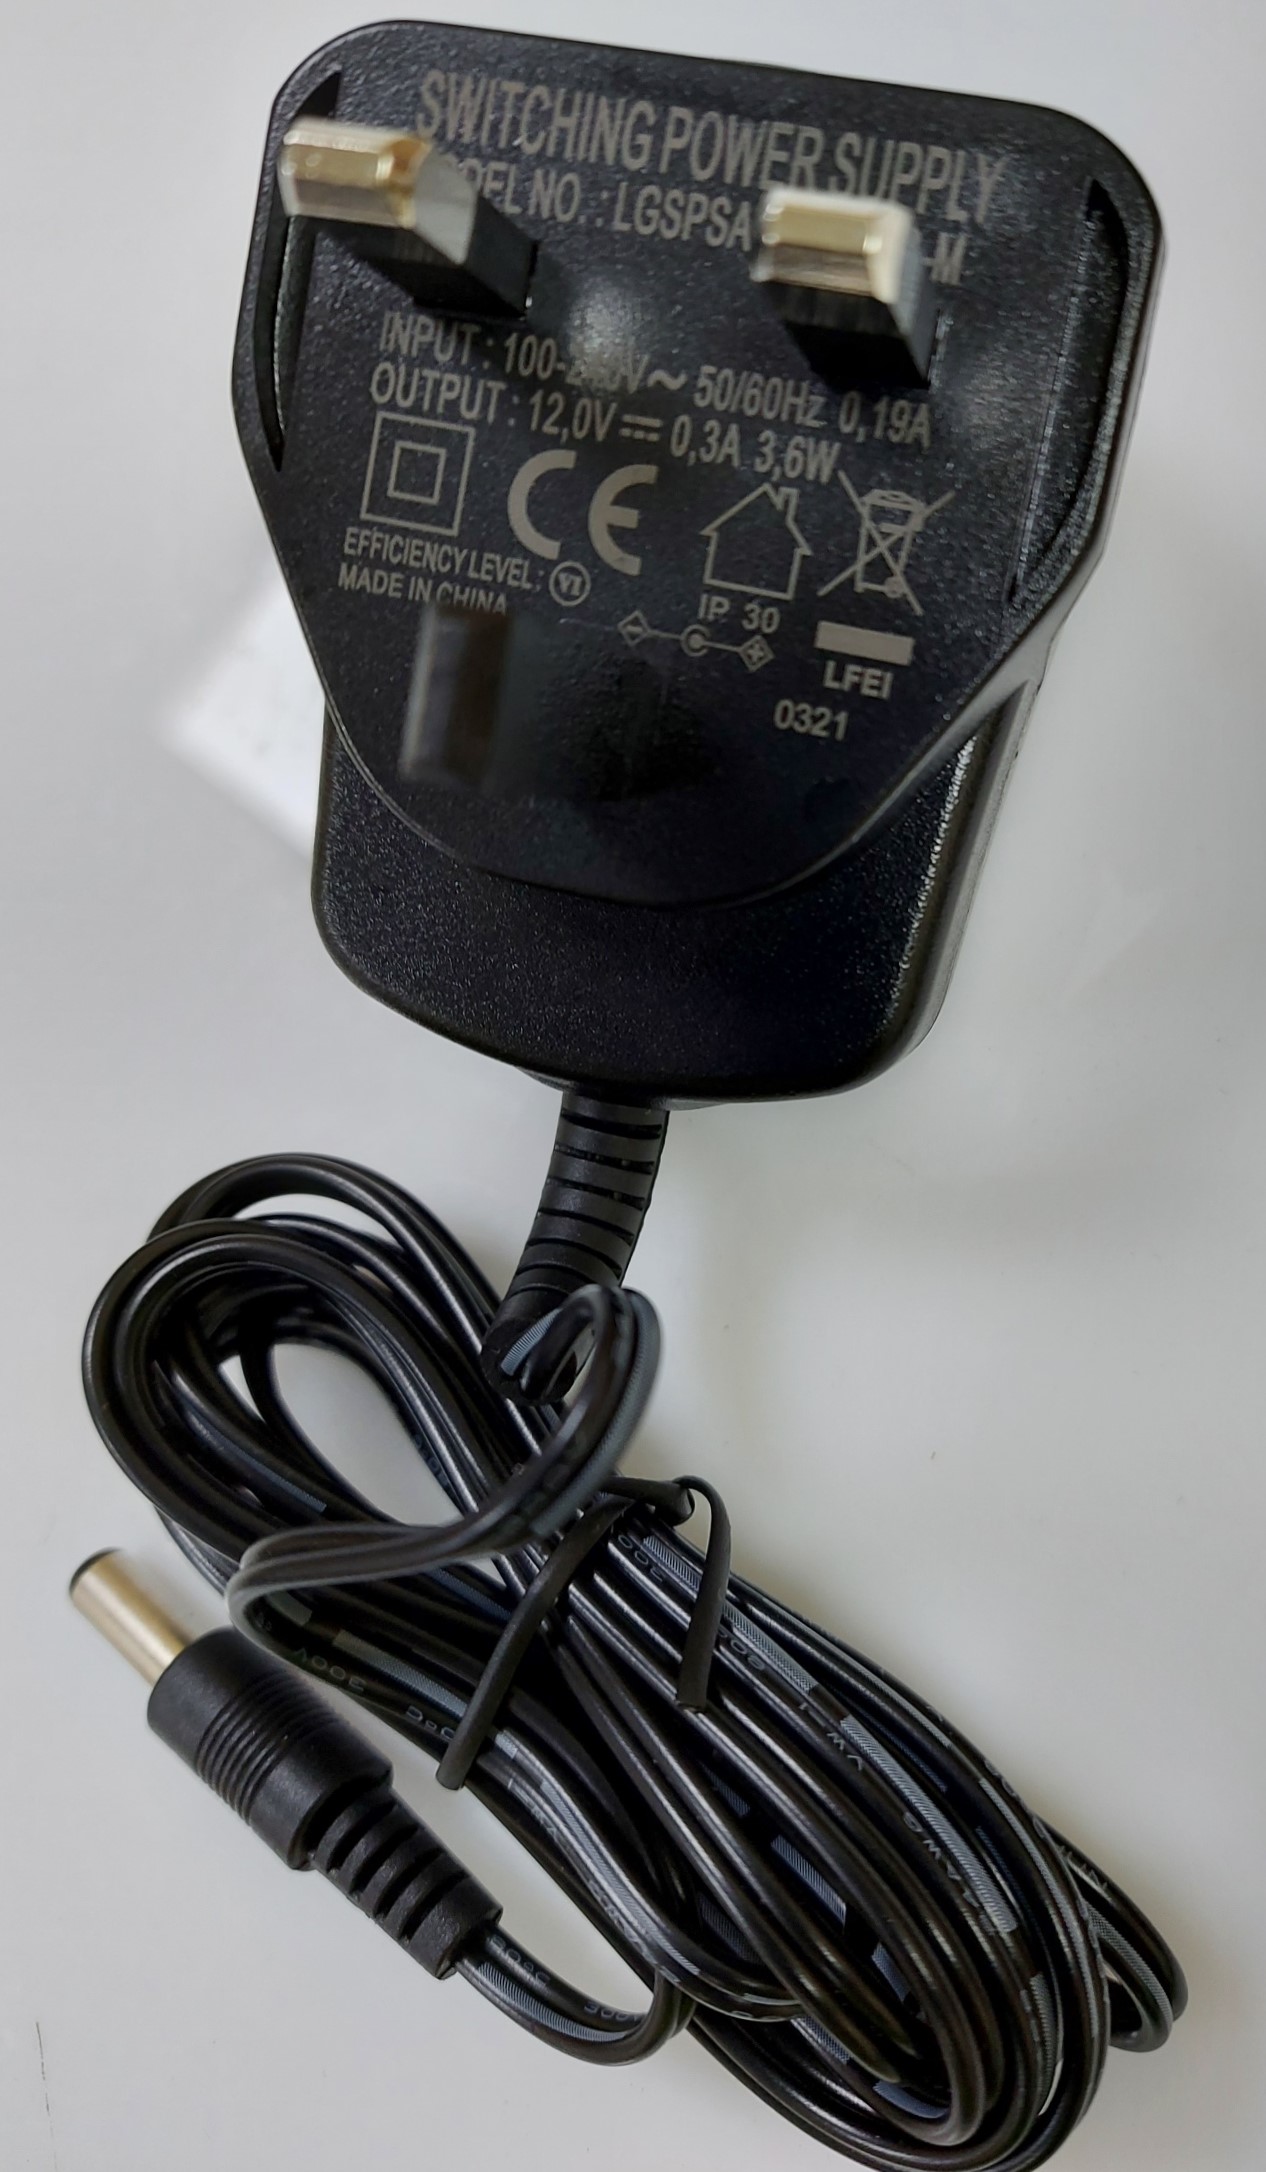 Mains Charger/Adaptor for Marsden Chair/Hoist Scales - Single Screen Version